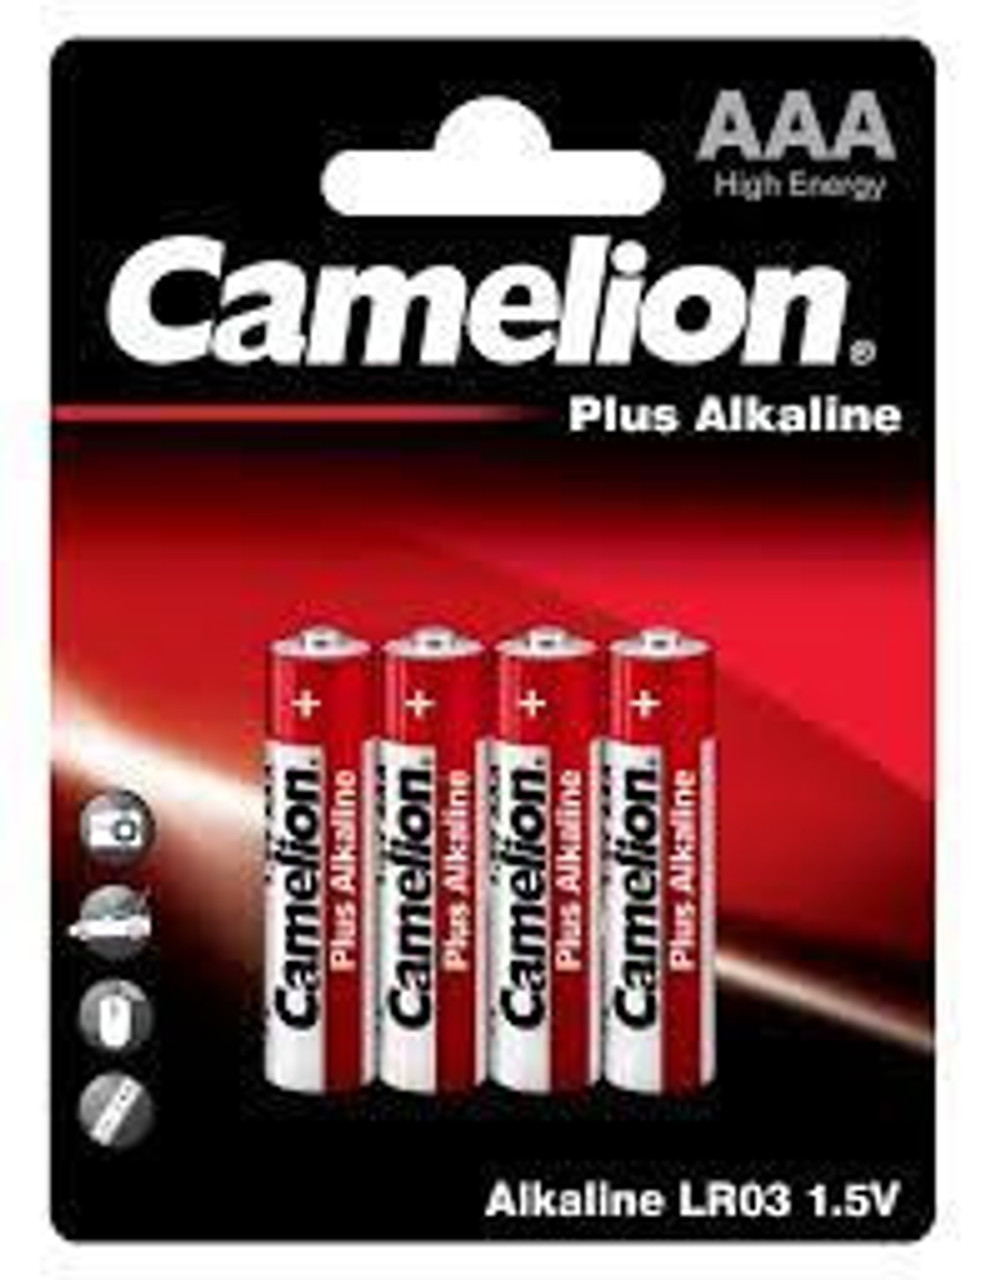 Camelion PACK OF 24 6 - 4 Packs AAA - ALKALINE BATTERIES IN RETAIL PACKAGING FREE SHIPPING